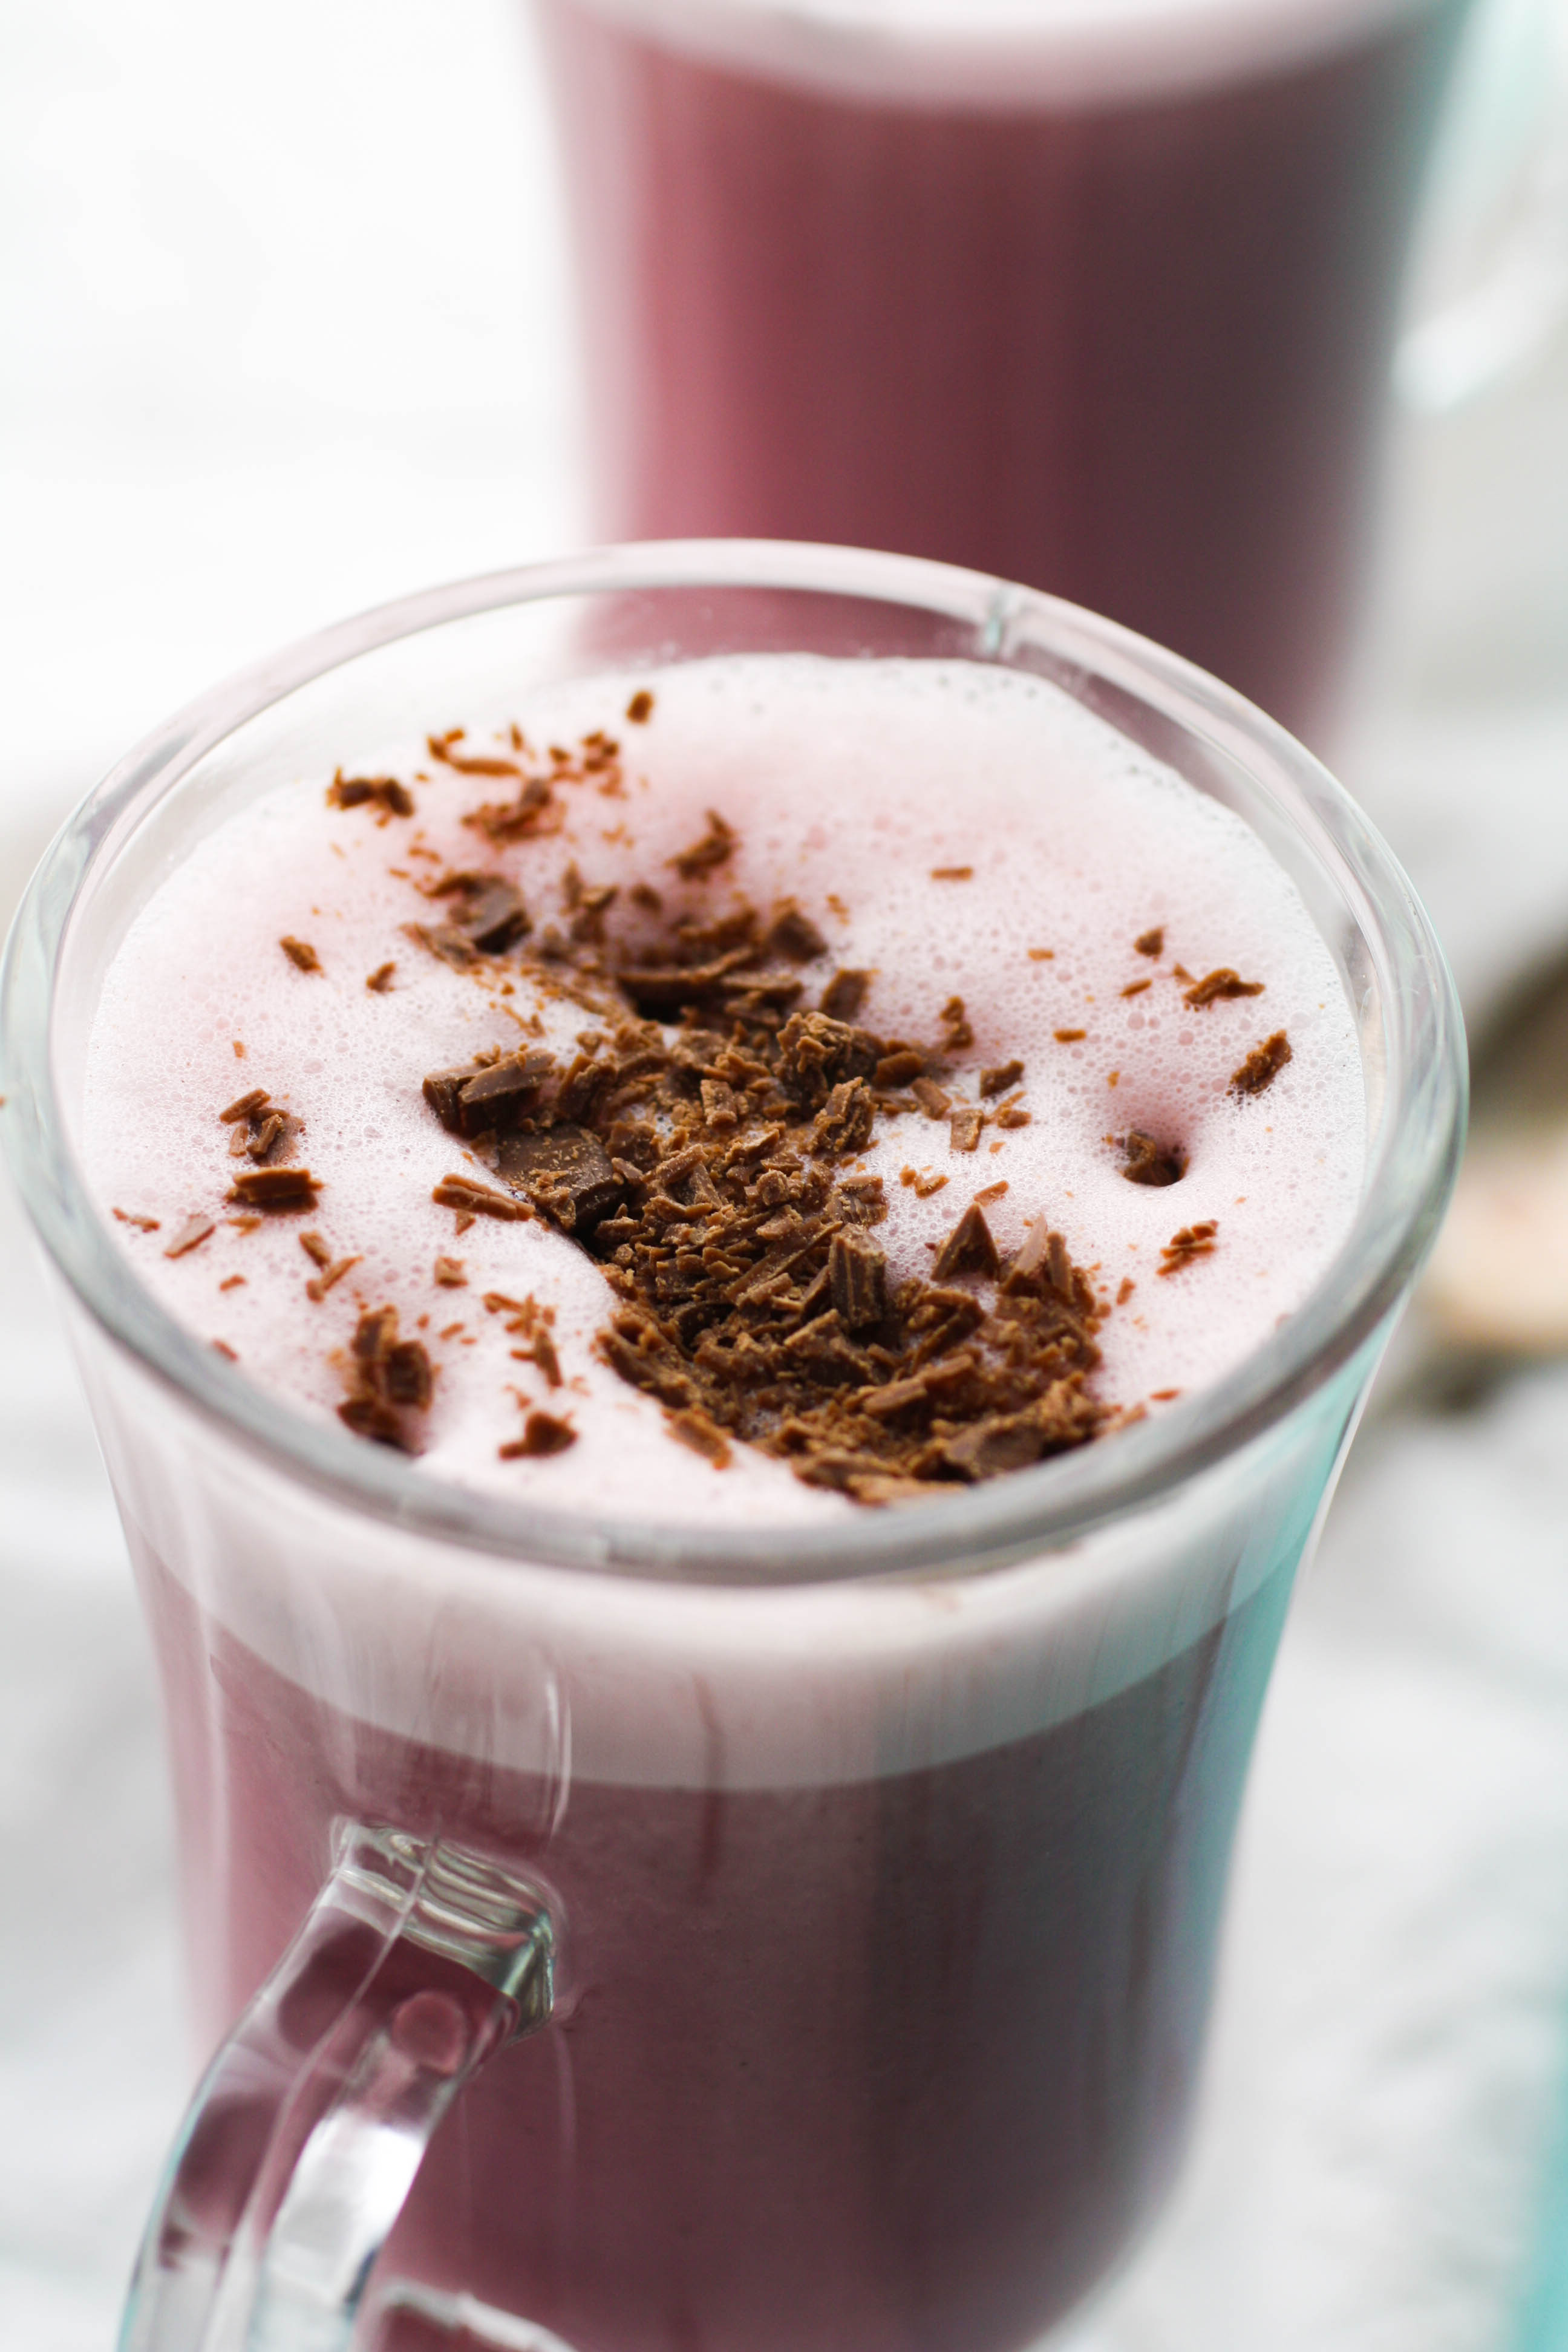 Spiced Beet and Oat Milk Latte is warm and tasty drink for any time of day or night.